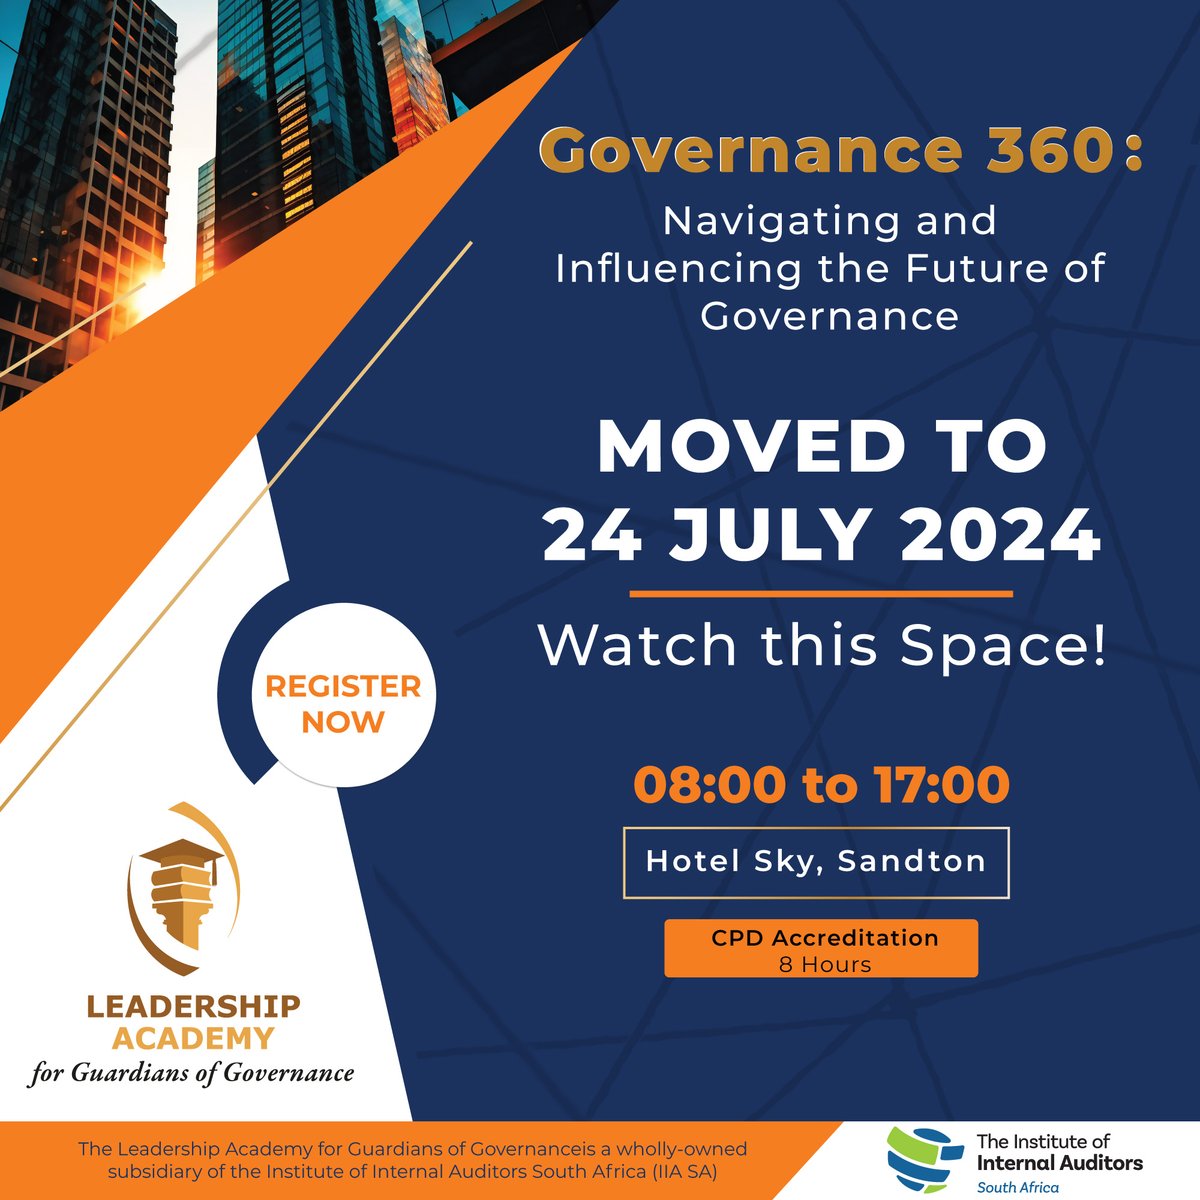 Mark your calendars for the new date of the Governance 360: Navigating and Influencing the Future of Governance Conference - now happening on the 24th of July! Register today to secure your spot: evolve.eventoptions.co.za/register/gover….
#Governance360
@IIASOUTHAFRICA